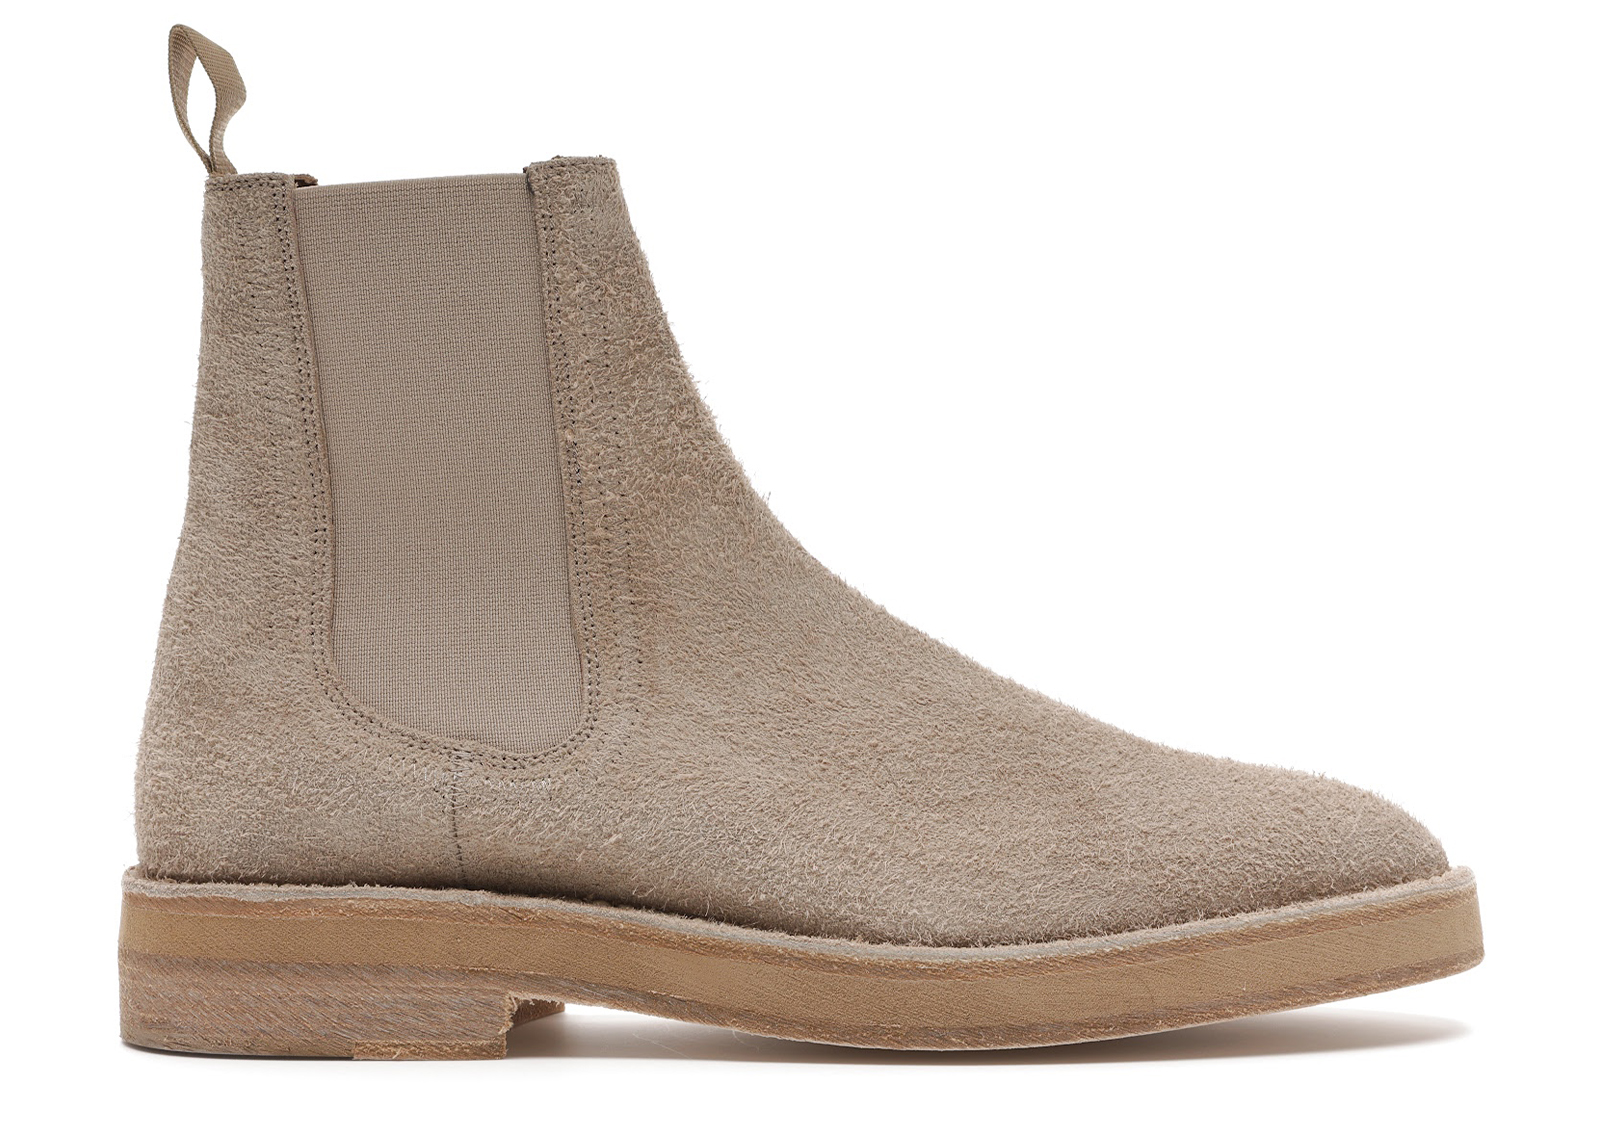 Yeezy Chelsea Boot Thick Shaggy Suede Taupe Men's - KM5005.038 - US